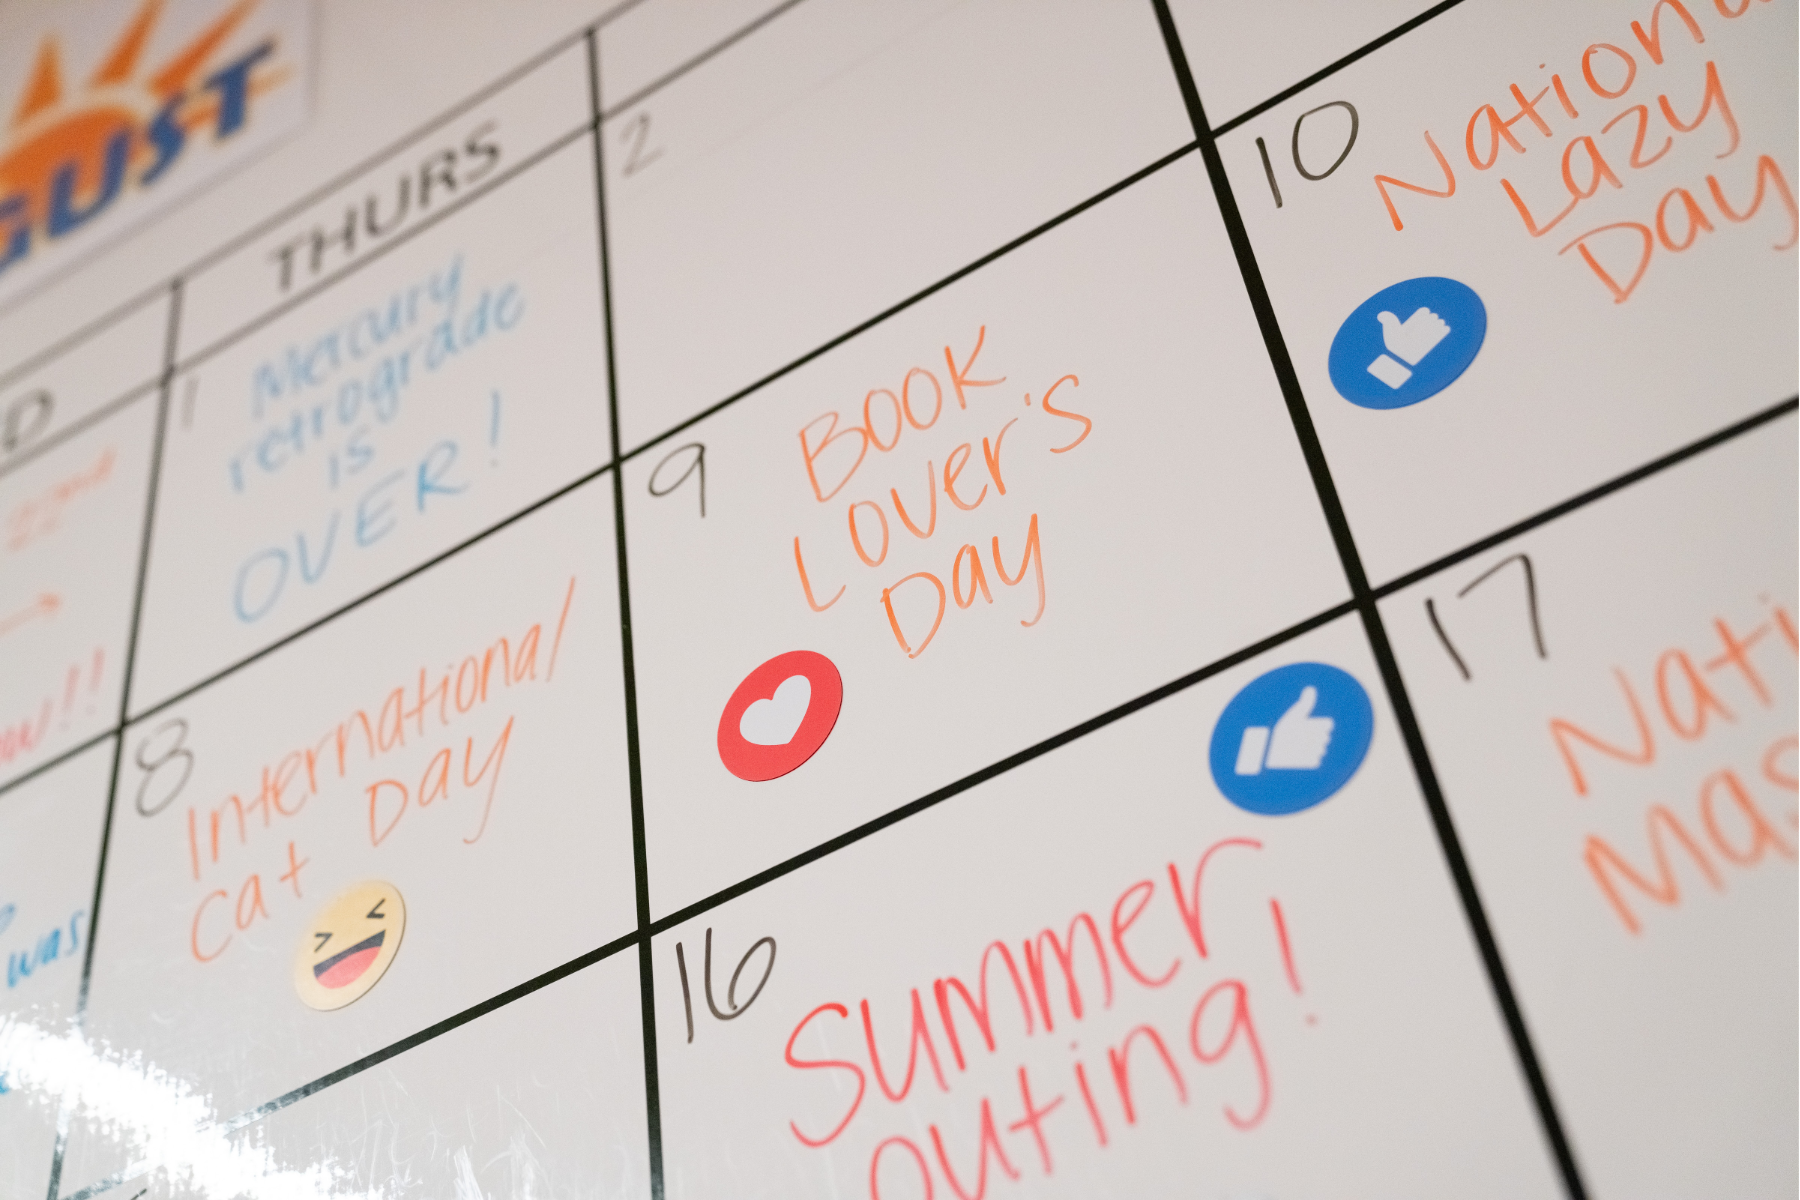 Image of a whiteboard calendar with events and magnets on it